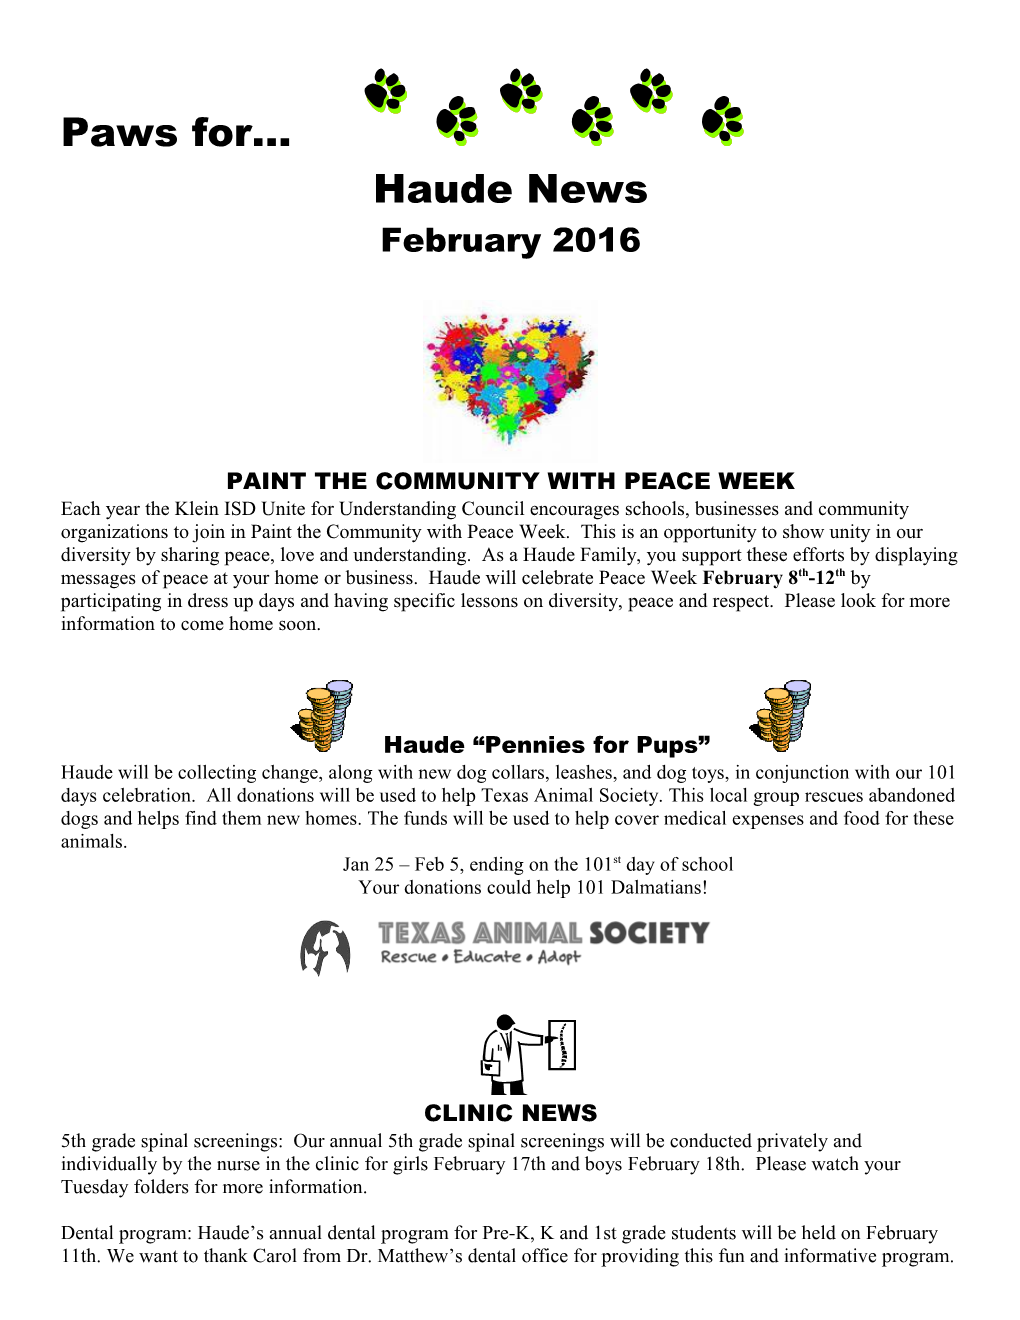 Paint the Community with Peace Week